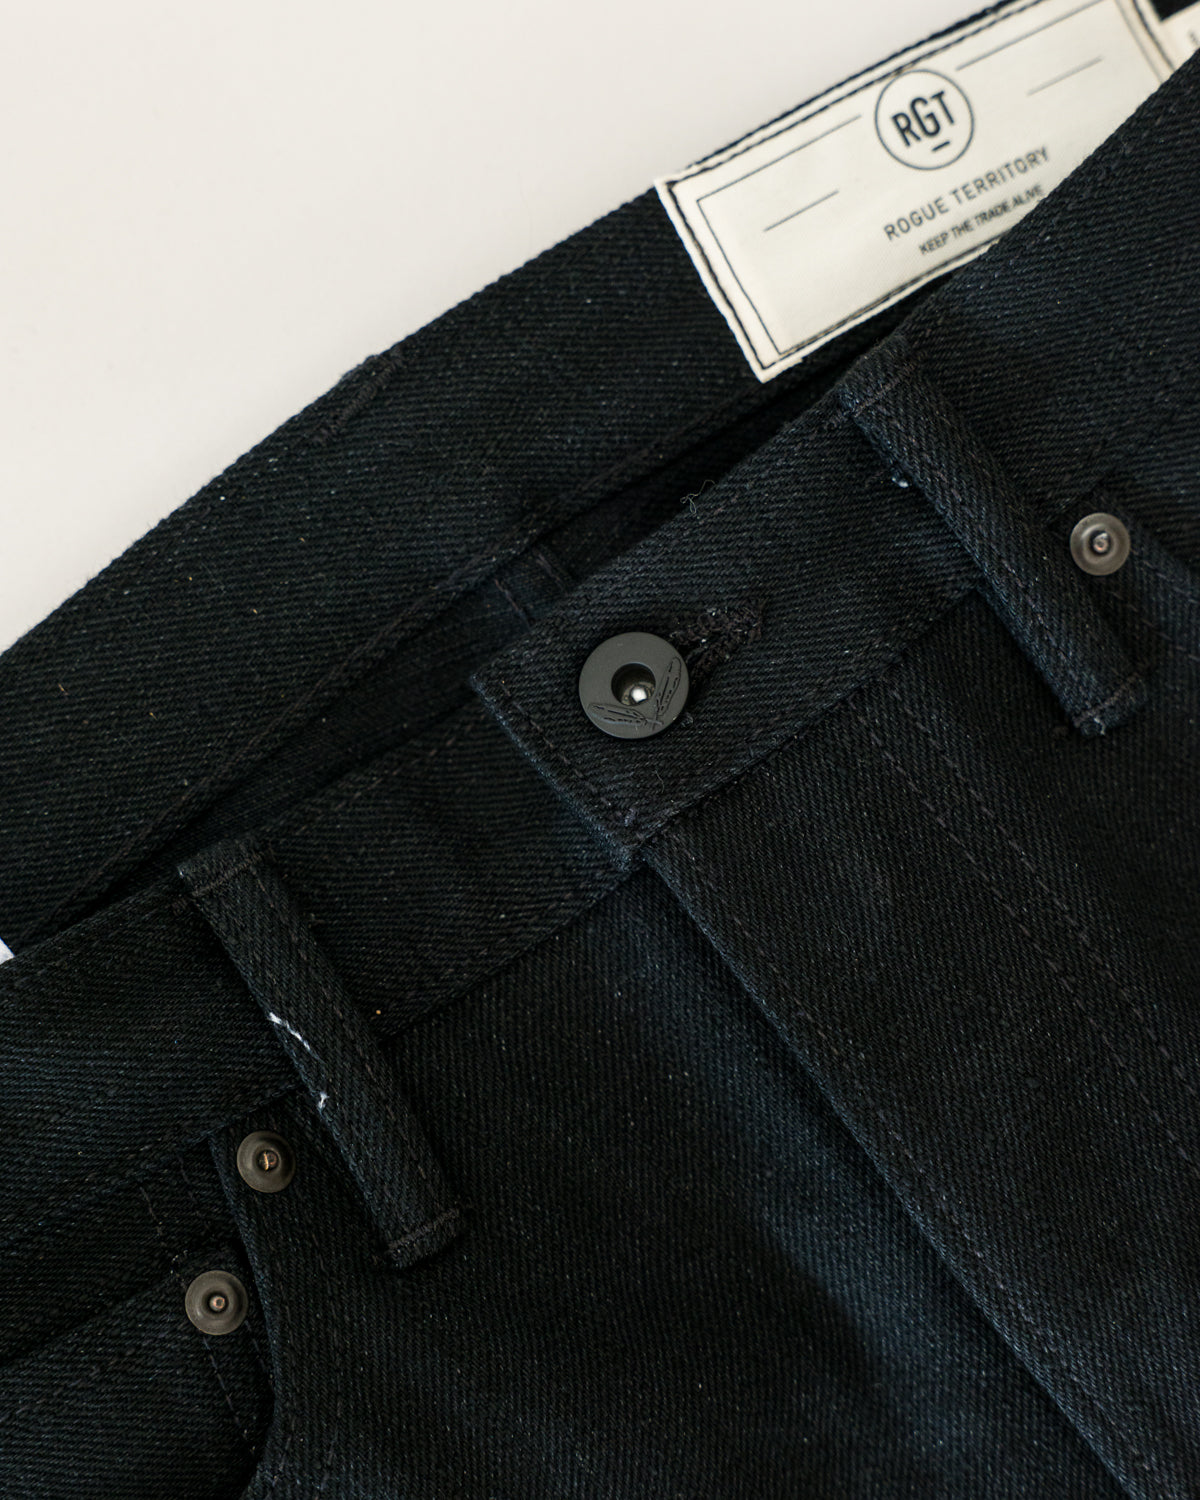 17oz - Cryptic Stealth Selvedge - SK Fit